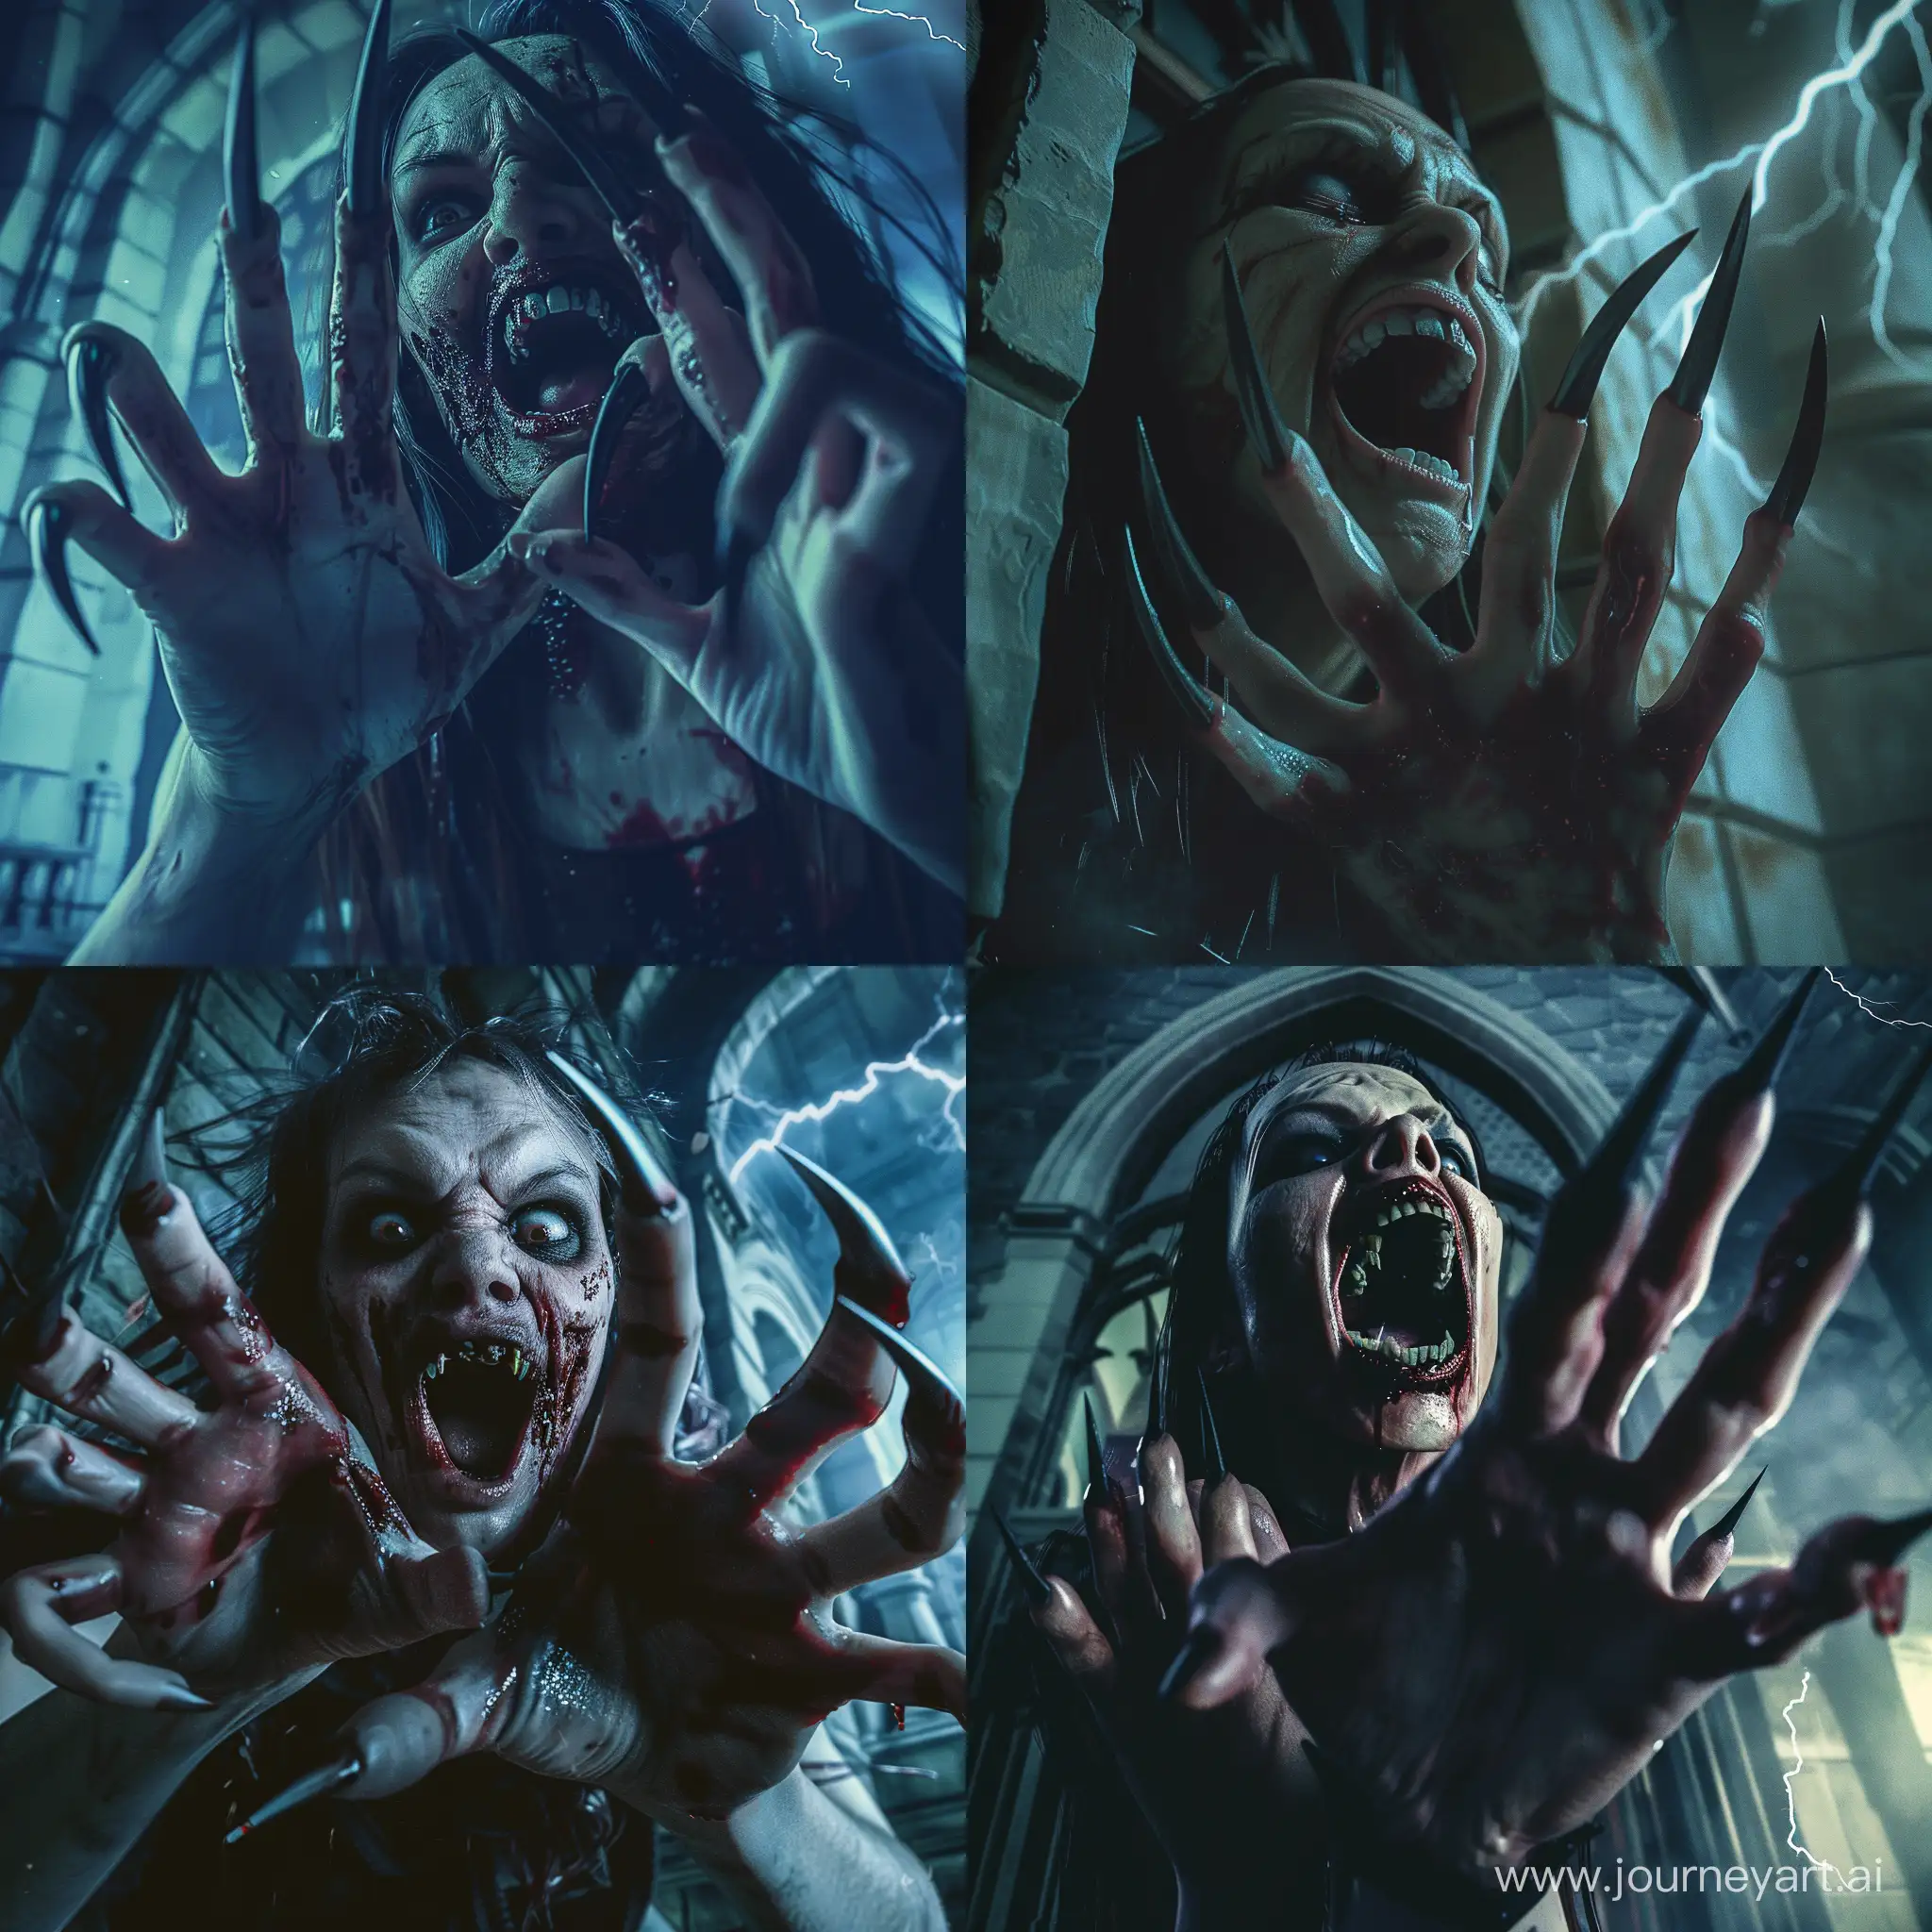 A terrible zombie woman, with long, curved, pointed nails sticking out from her five fingers, like menacing claws. She looks as if she has climbed out of a grave. Her mouth is open, revealing pointed teeth resembling fangs. The scene takes place at night in an abandoned building or castle. "She attacks her victim," hyperrealism, cinematics, high detail, photo detailings, high quality photorealism, terrifying, aggression, bloodlust, sharp fangs, dark atmosphere, realistic blood detail, detailed nails horror, atmospheric lightning, anatomical full-length.

